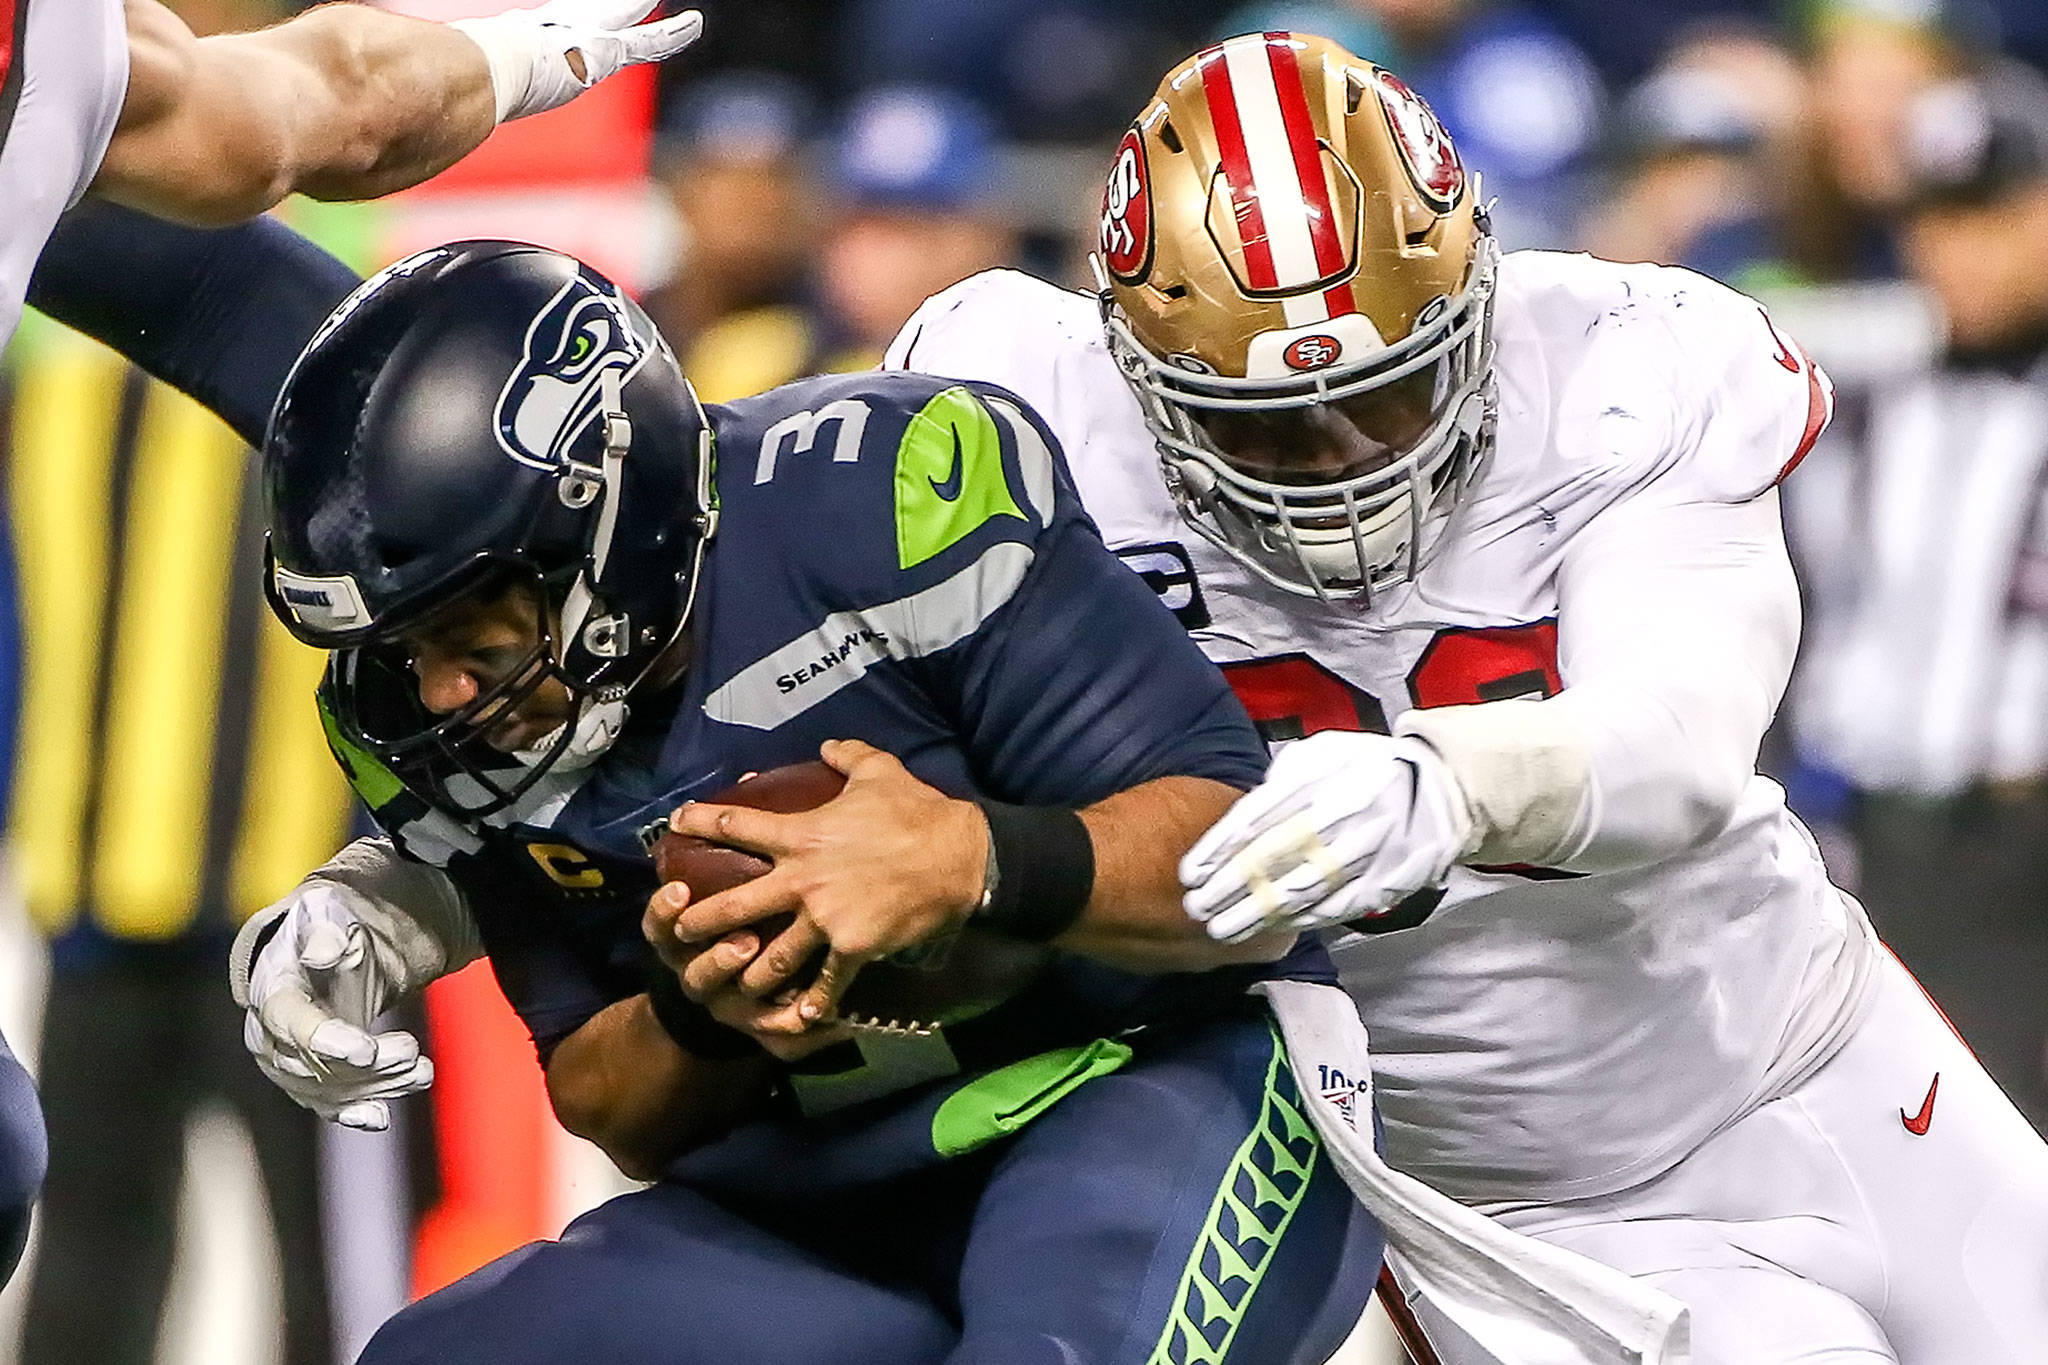 San Francisco’s DeForest Buckner sacks Seattle Seahawks’ Russell Wilson in the second quarter Sunday evening at CenturyLink Field in Seattle on December 29, 2019. The 49ers led 13-0 at the half. (Kevin Clark / The Herald)